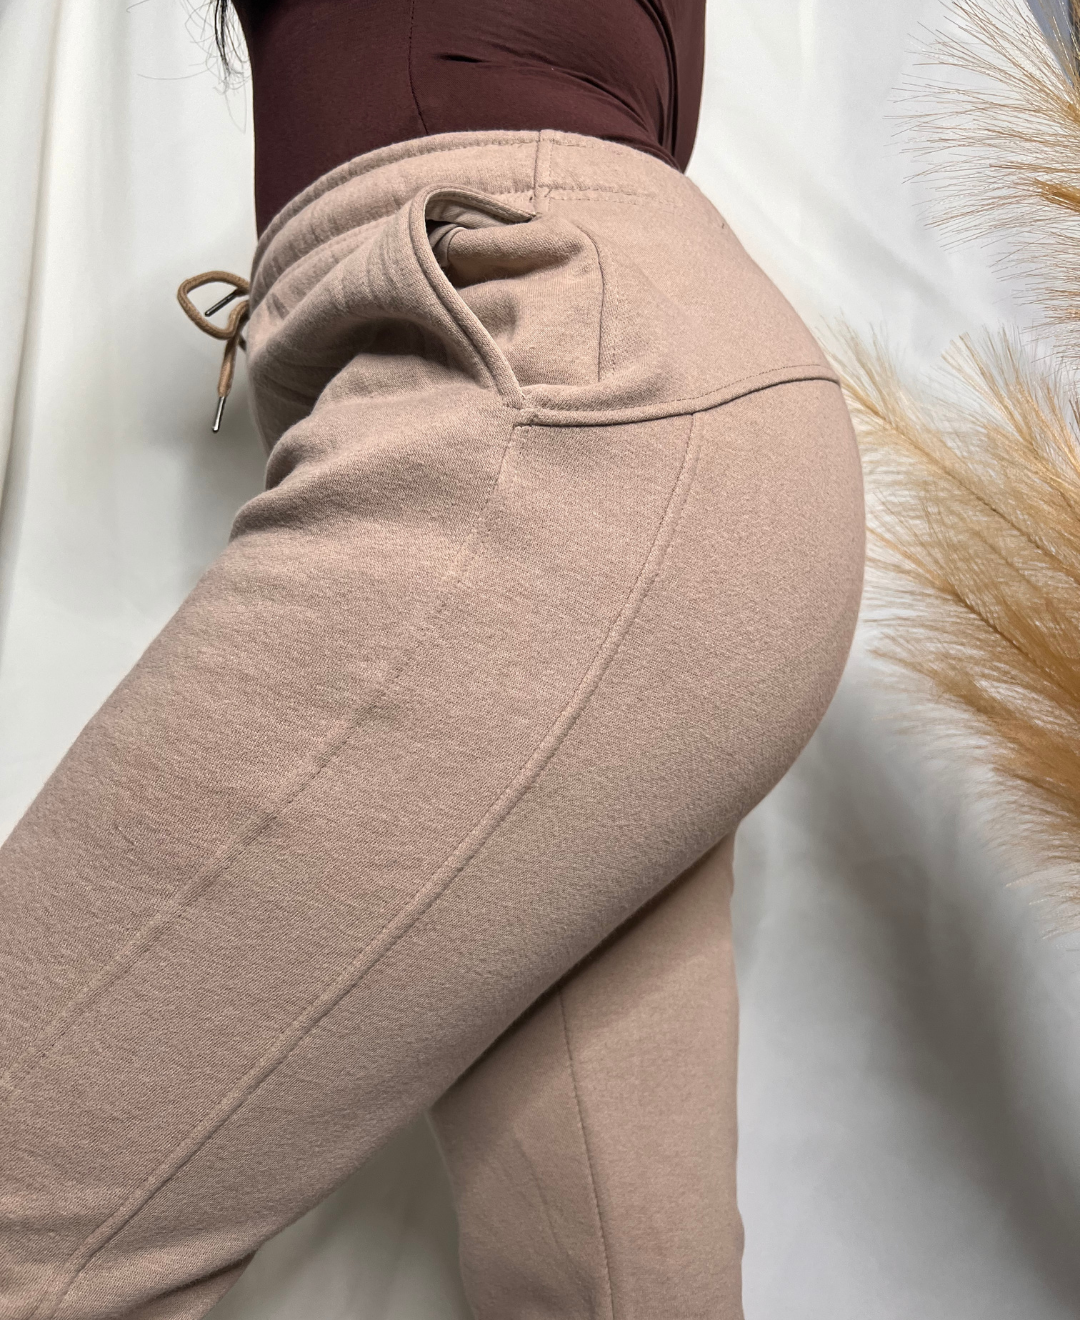 Comfy Joggers for Women - Deep Taupe